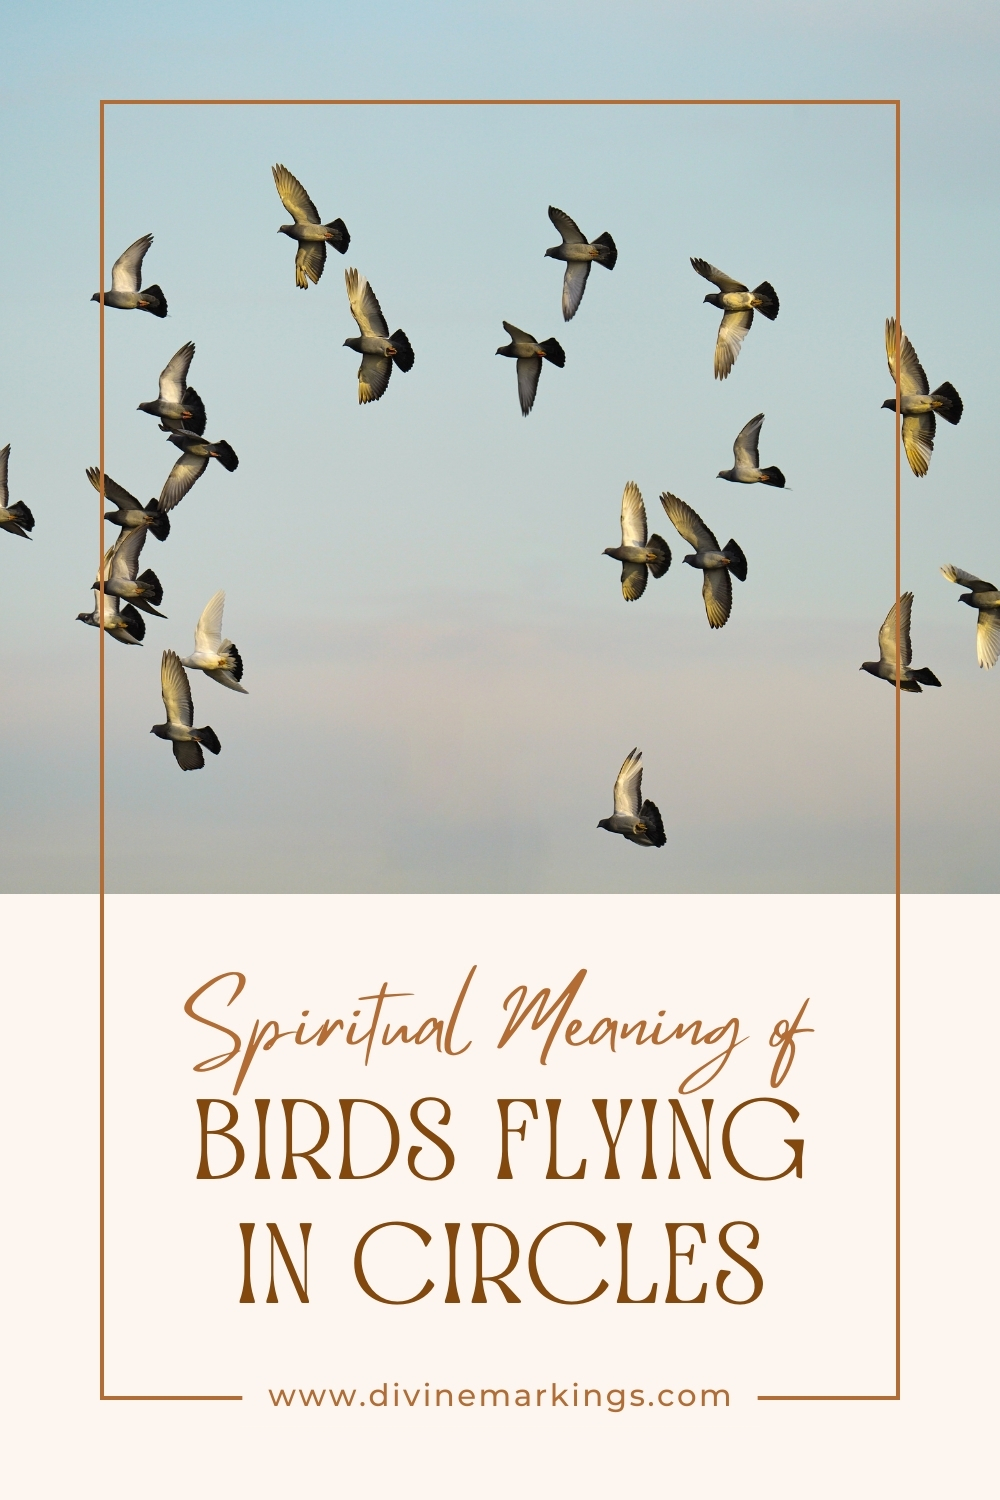 Spiritual Meaning of Birds Flying in Circles